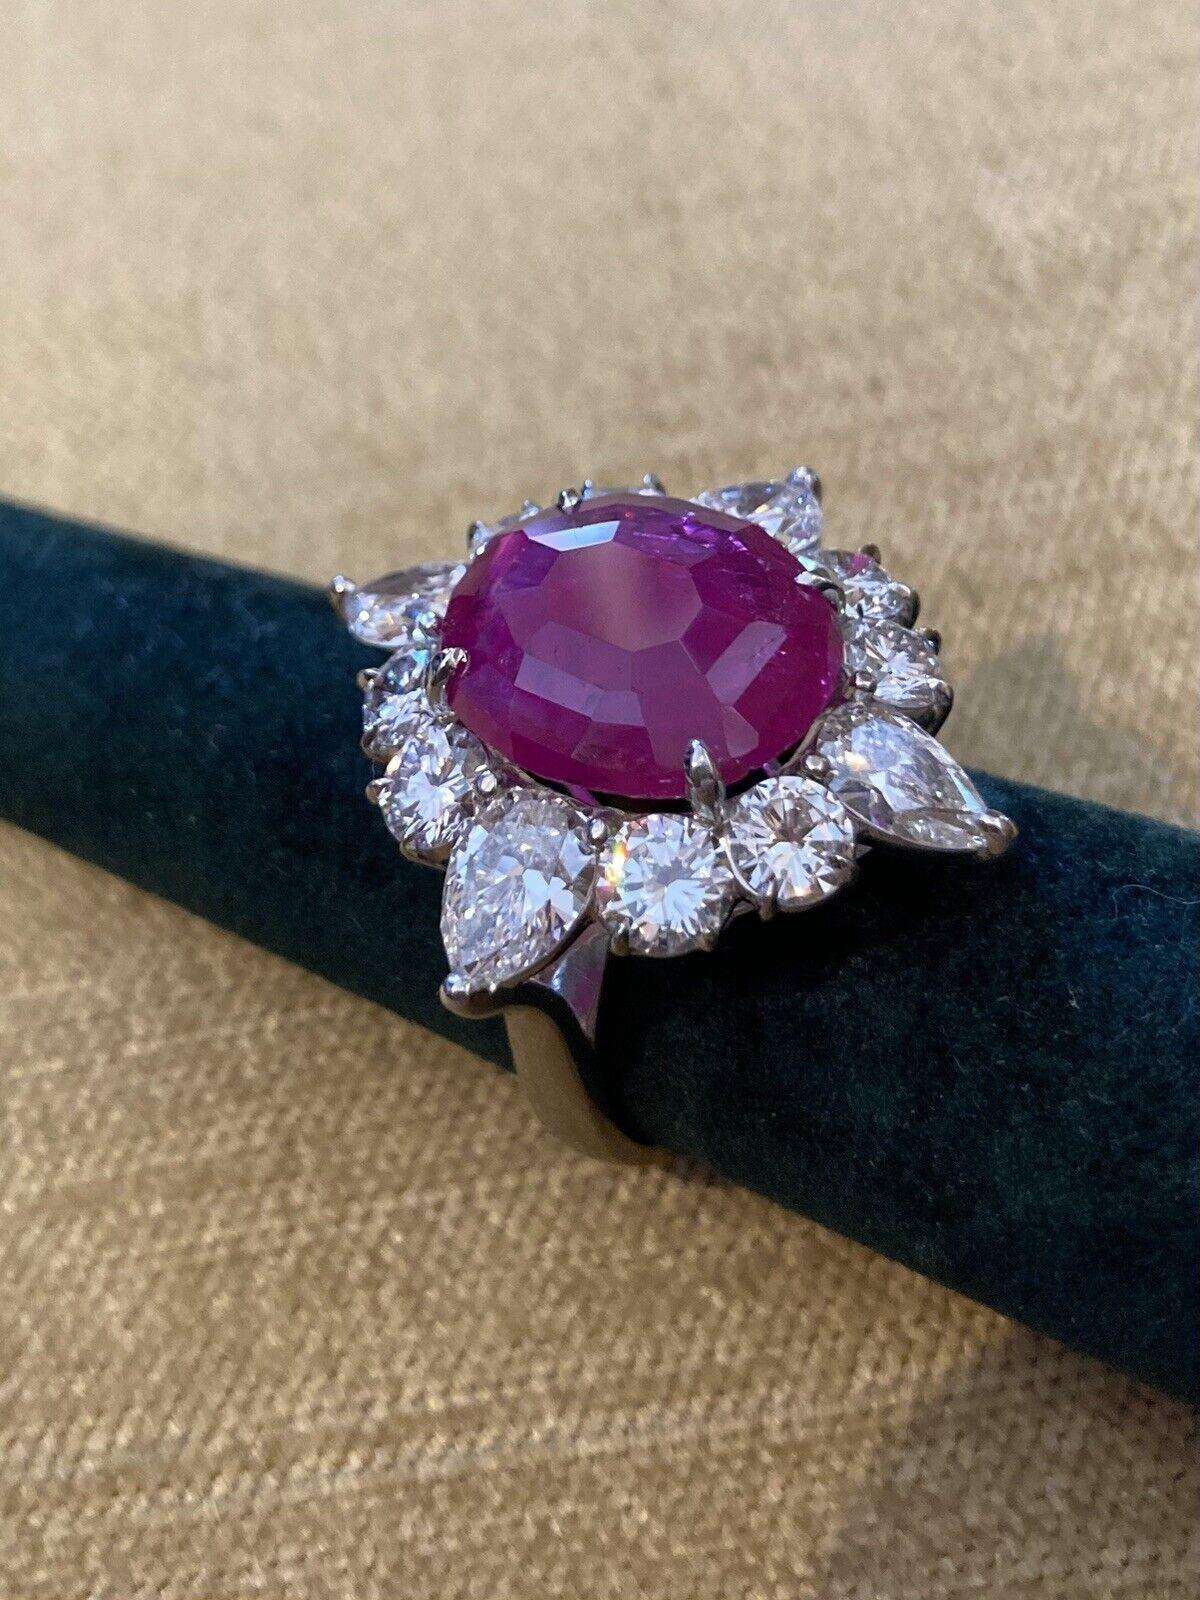 9.34 ct AGL Certified Unheated Burma Ruby Ring in Platinum Diamond Setting

Unheated Burma Ruby (AGL Certified)
in Custom Platinum Diamond Setting features 
a Natural Oval Mixed Cut Ruby, certified Unheated
and Burma (Myanmar) Origin.

Ruby weighs